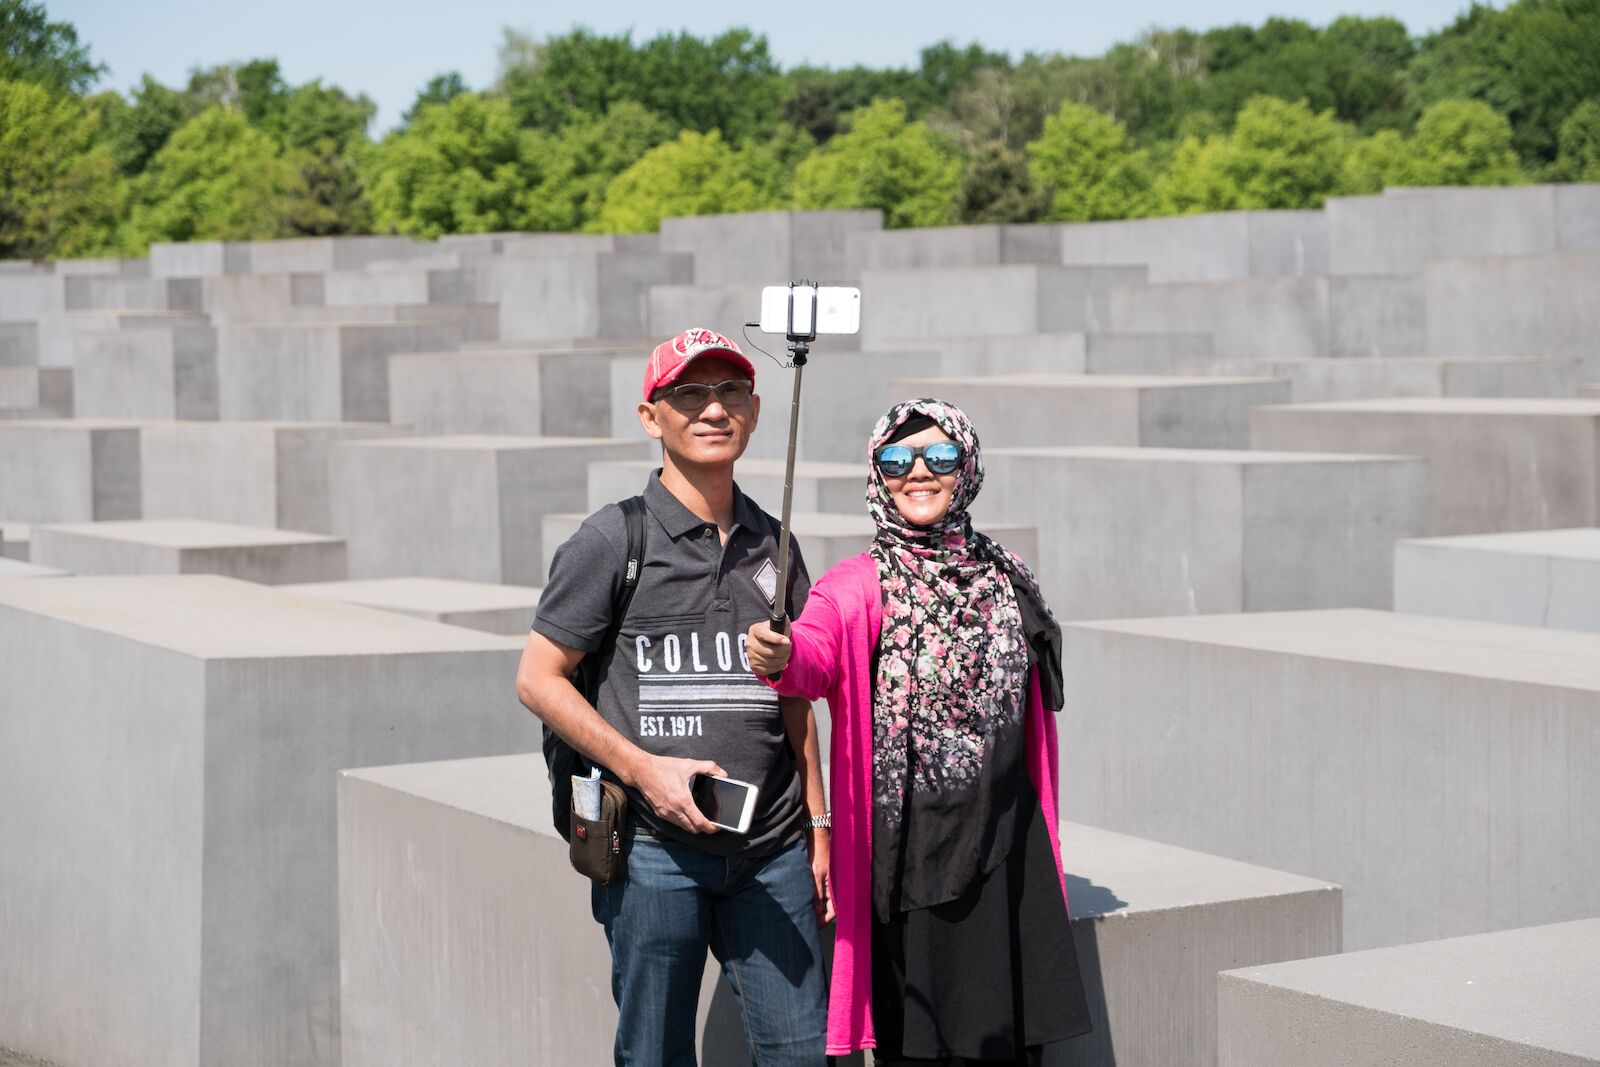 Tourists taking a selfie at the Holocaust Memorial in Berlin, Germany